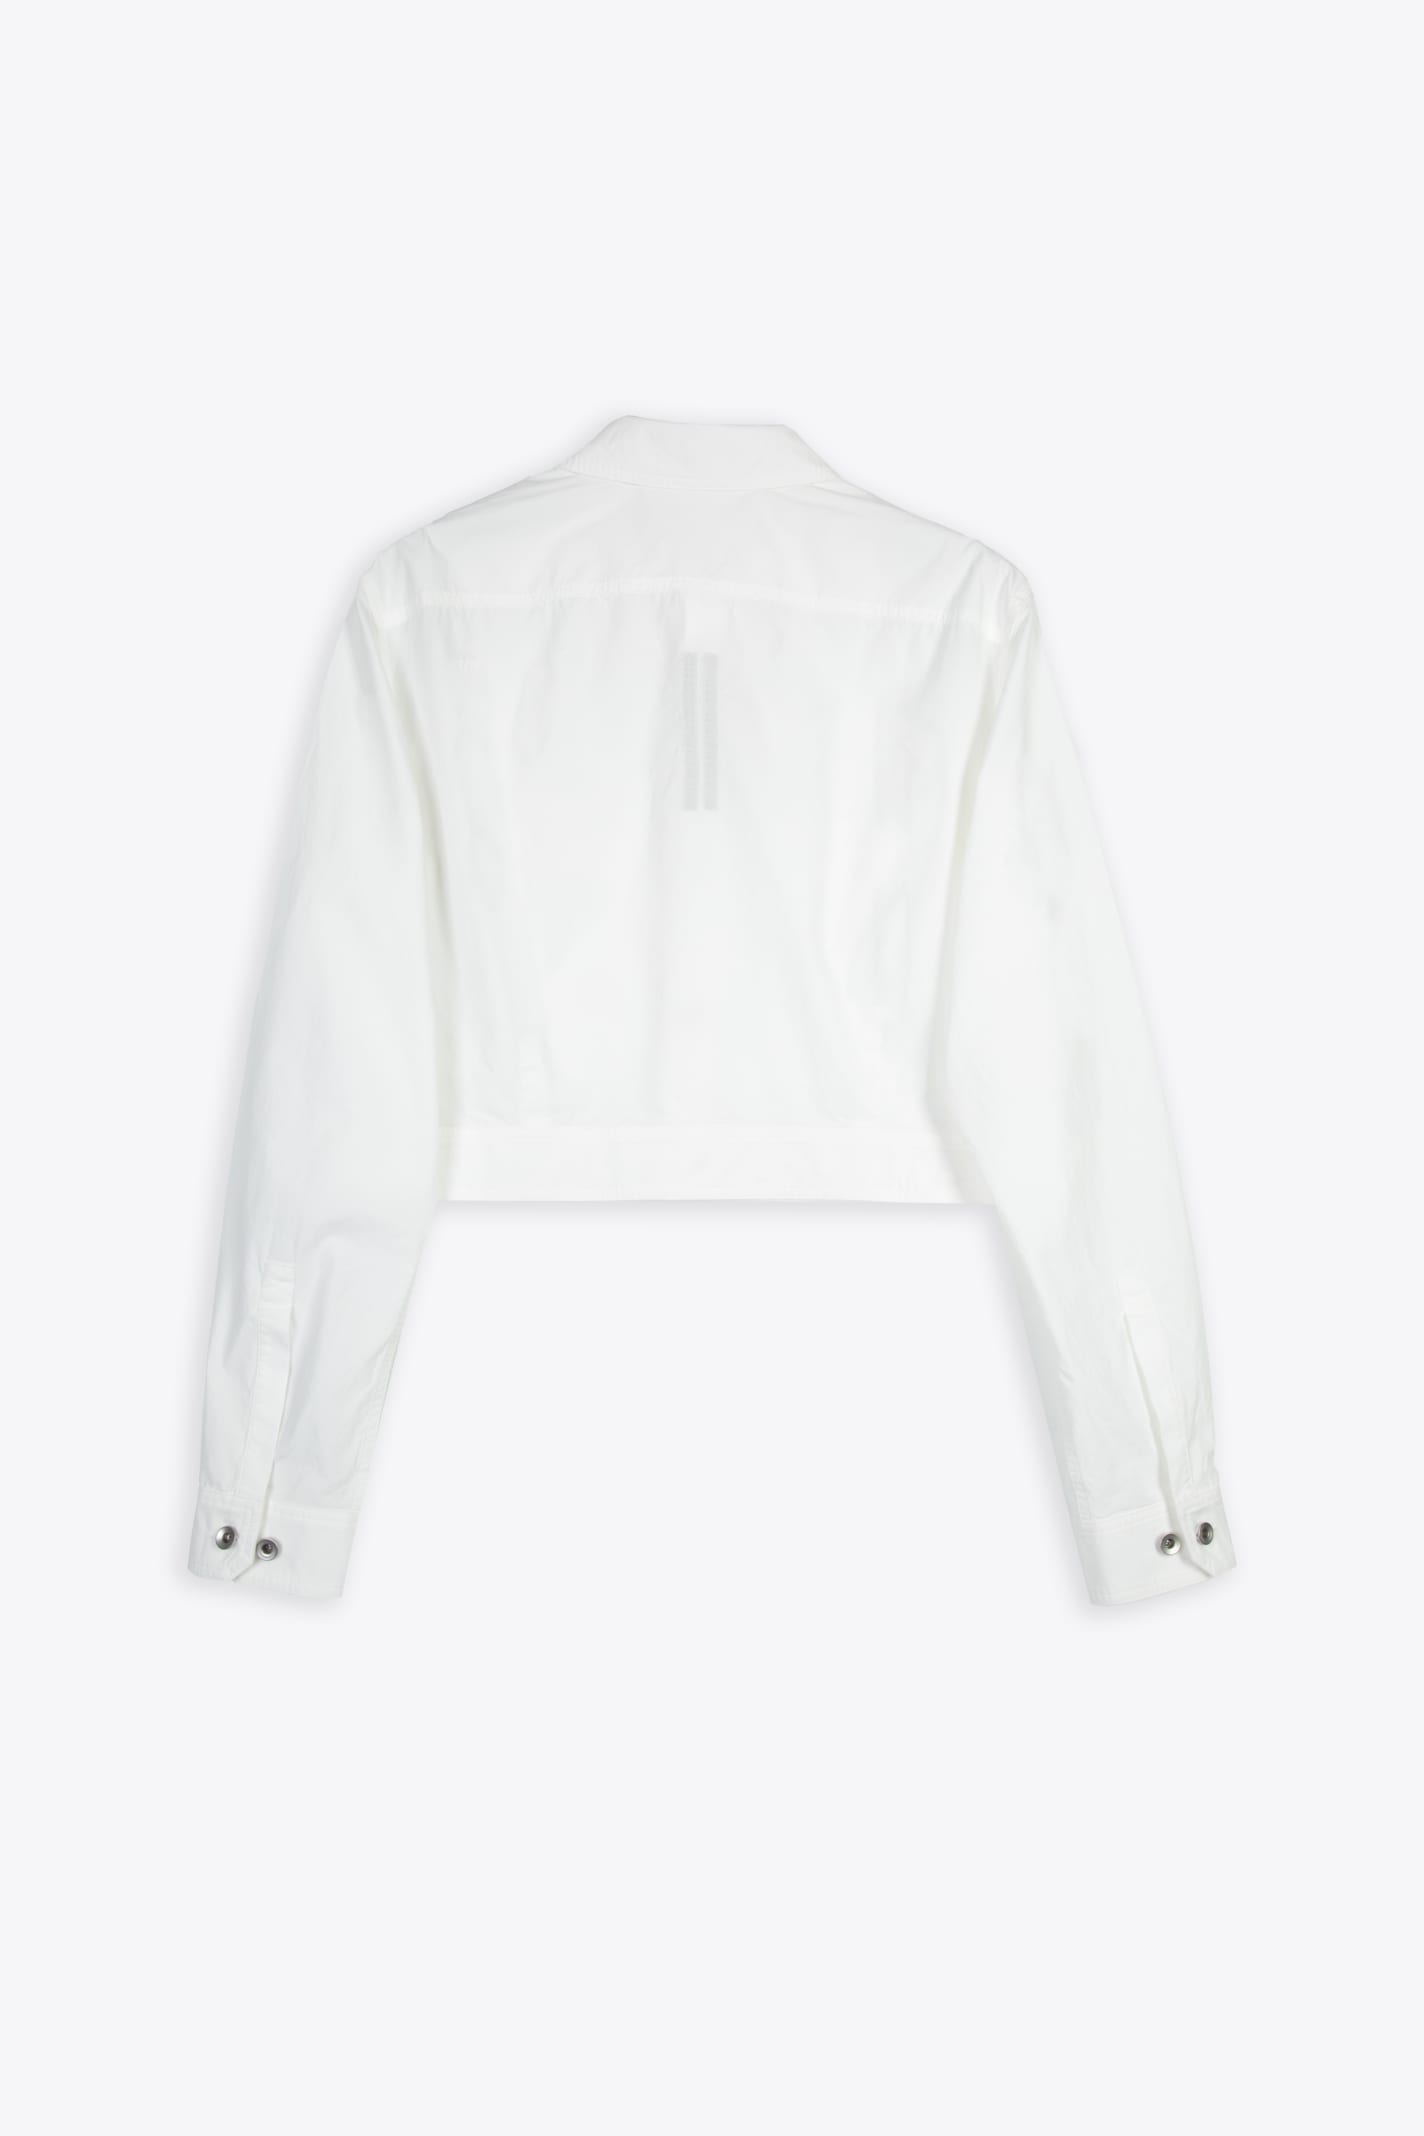 Shop Drkshdw Cape Sleeve Cropped Outershirt White Poplin Cotton Outershirt - Cape Sleeve Cropped Outershirt